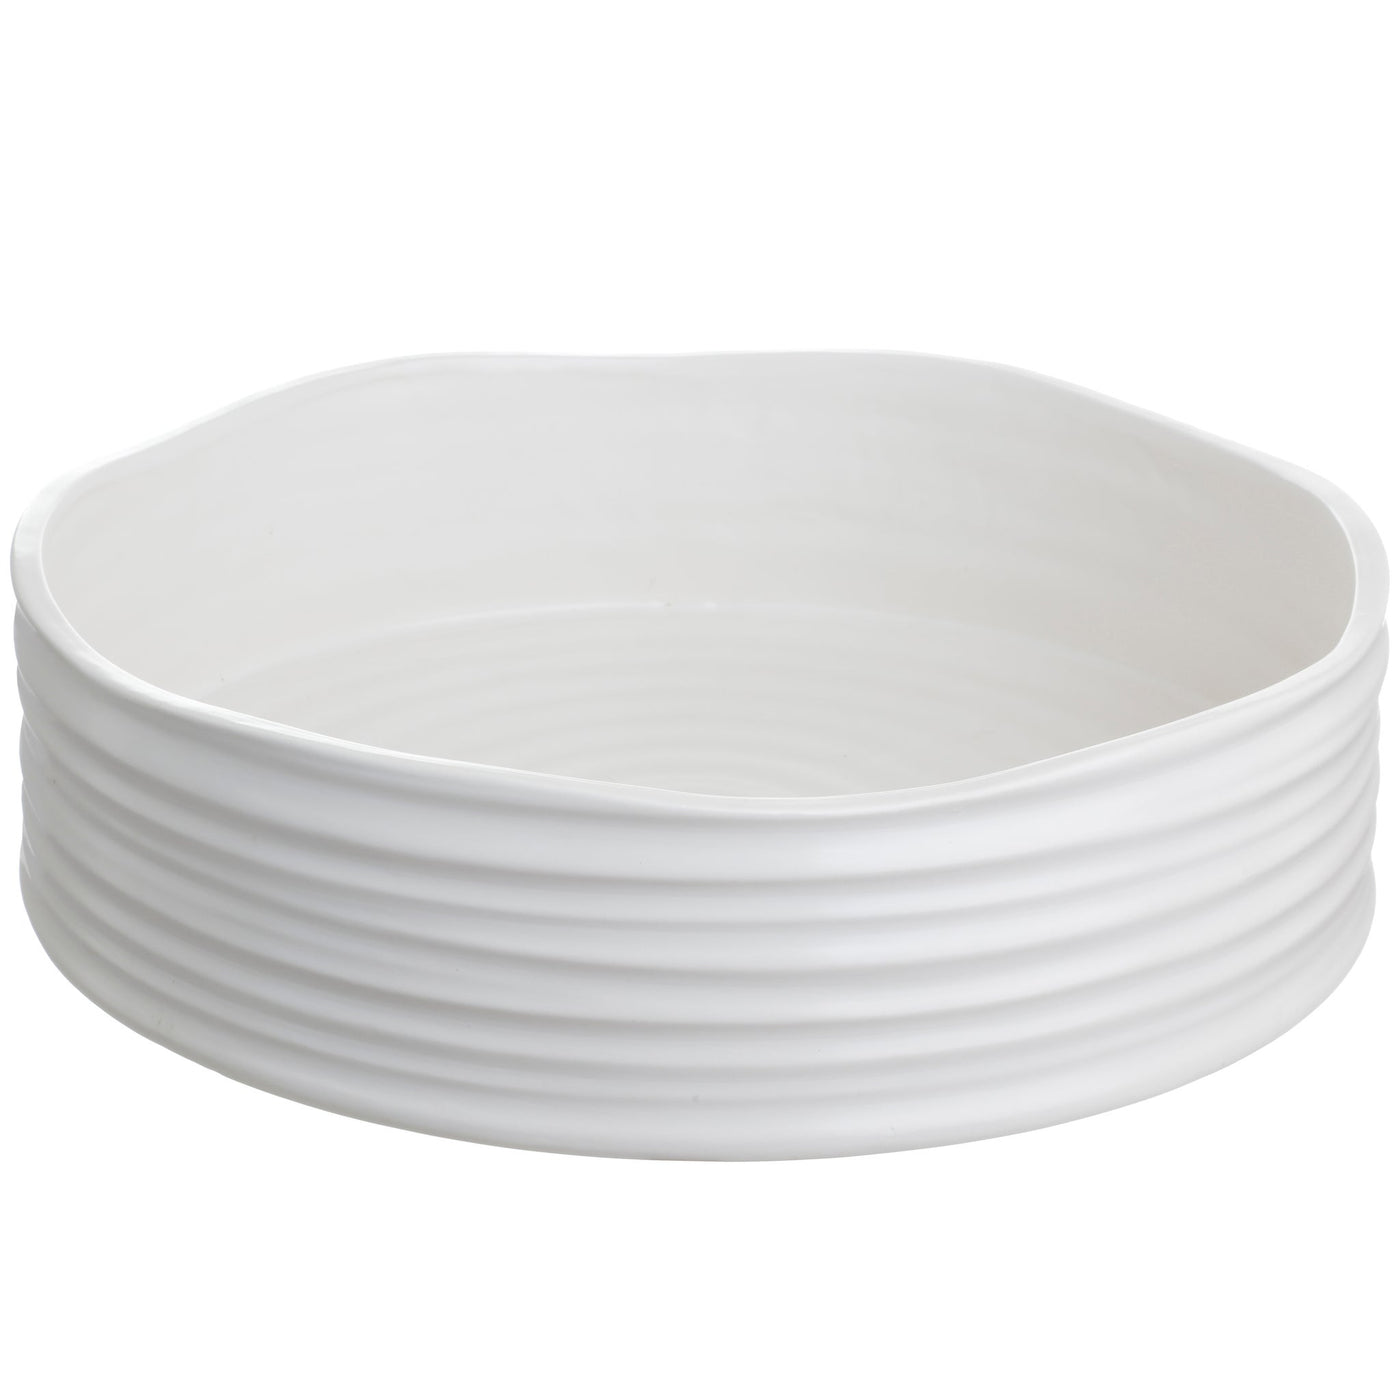 Urban Coil Bowl 14''WX3.5''H (IN STORE PICKUP ONLY)